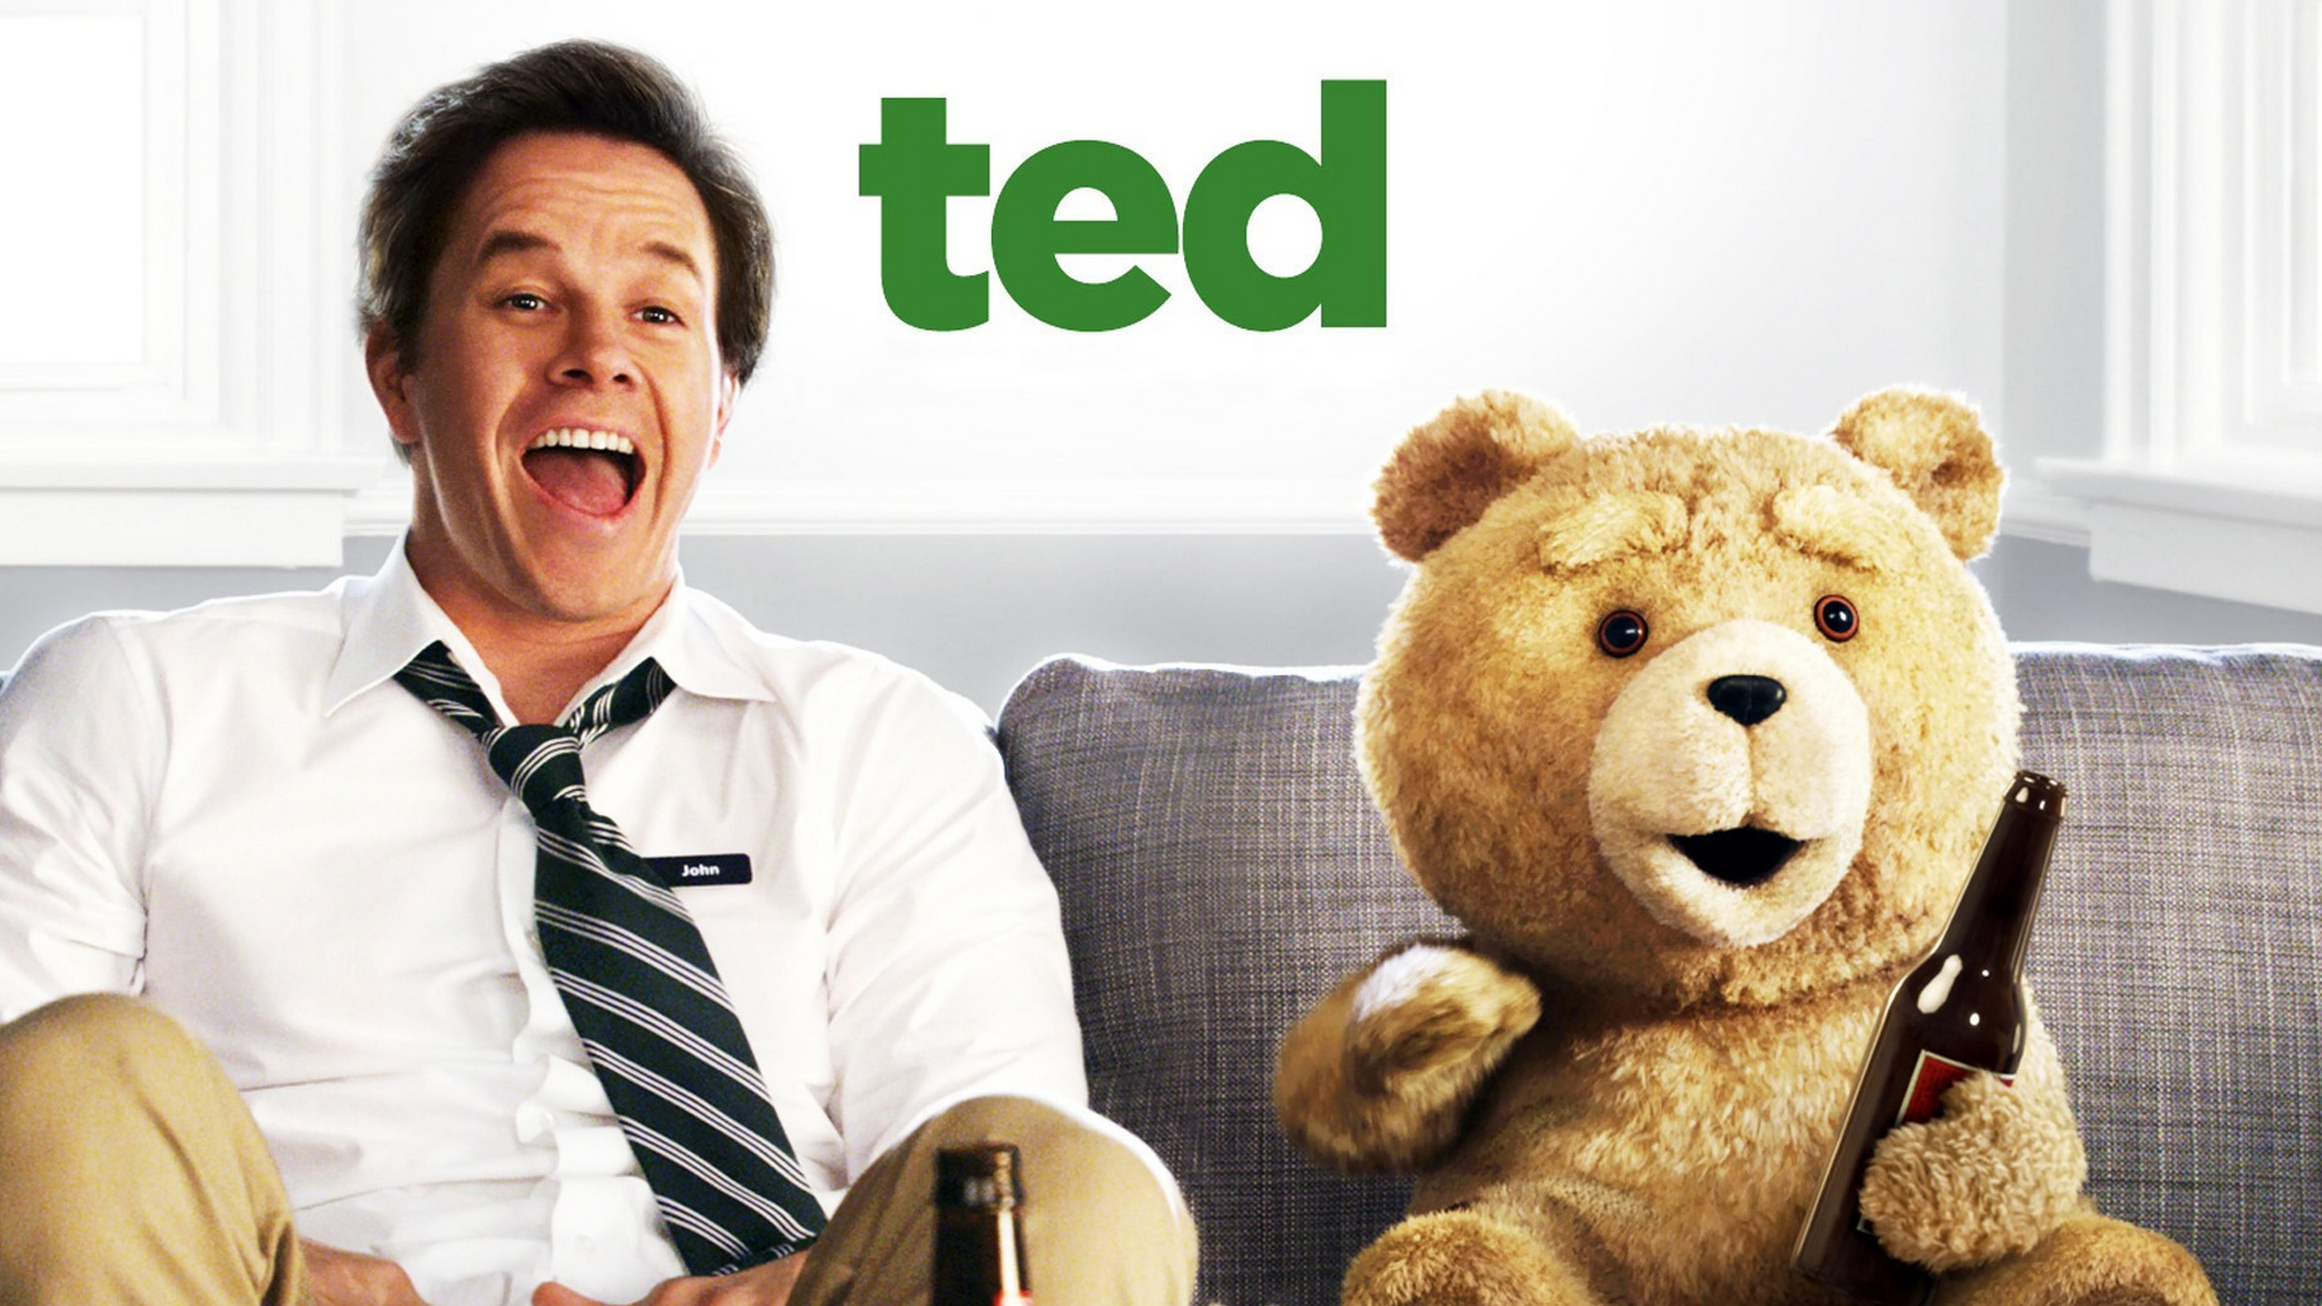 Mark Wahlberg in TED